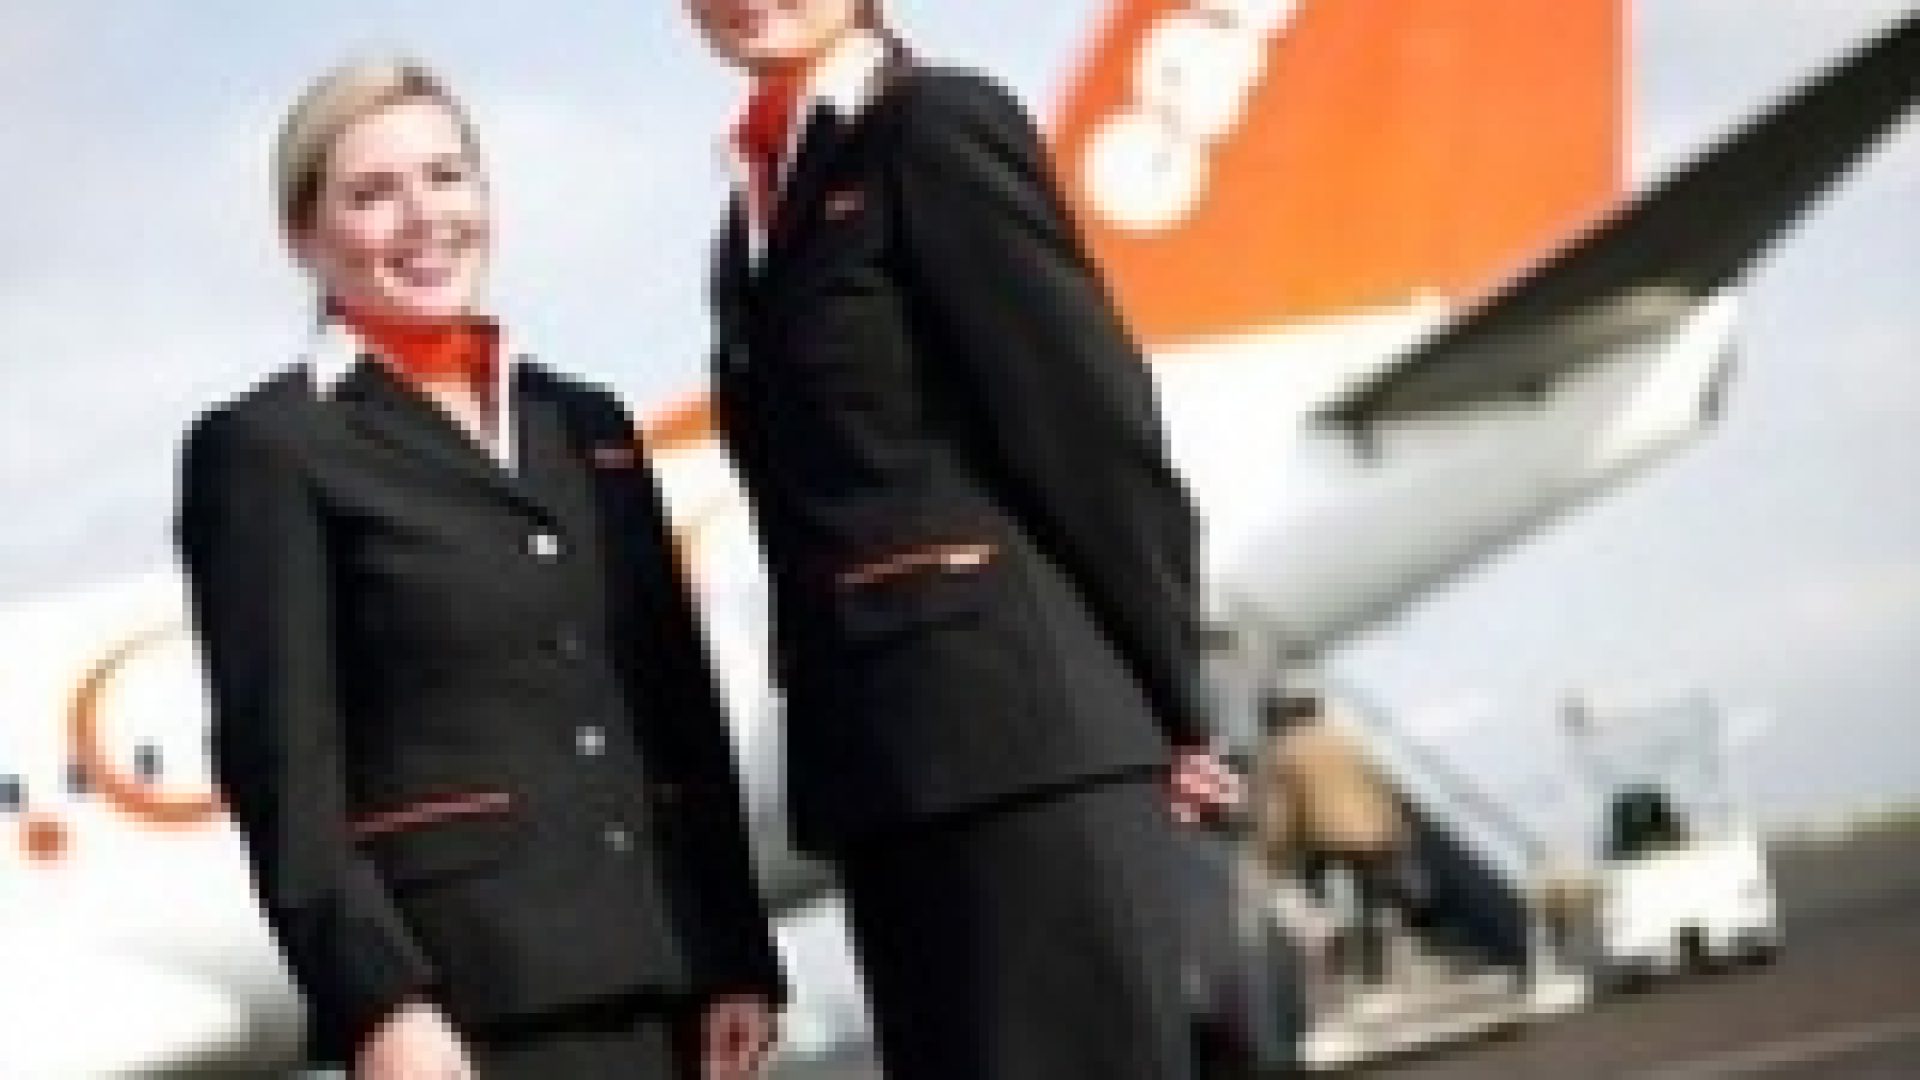 842-cover-easyjet-cabin-crew-at-lut-004